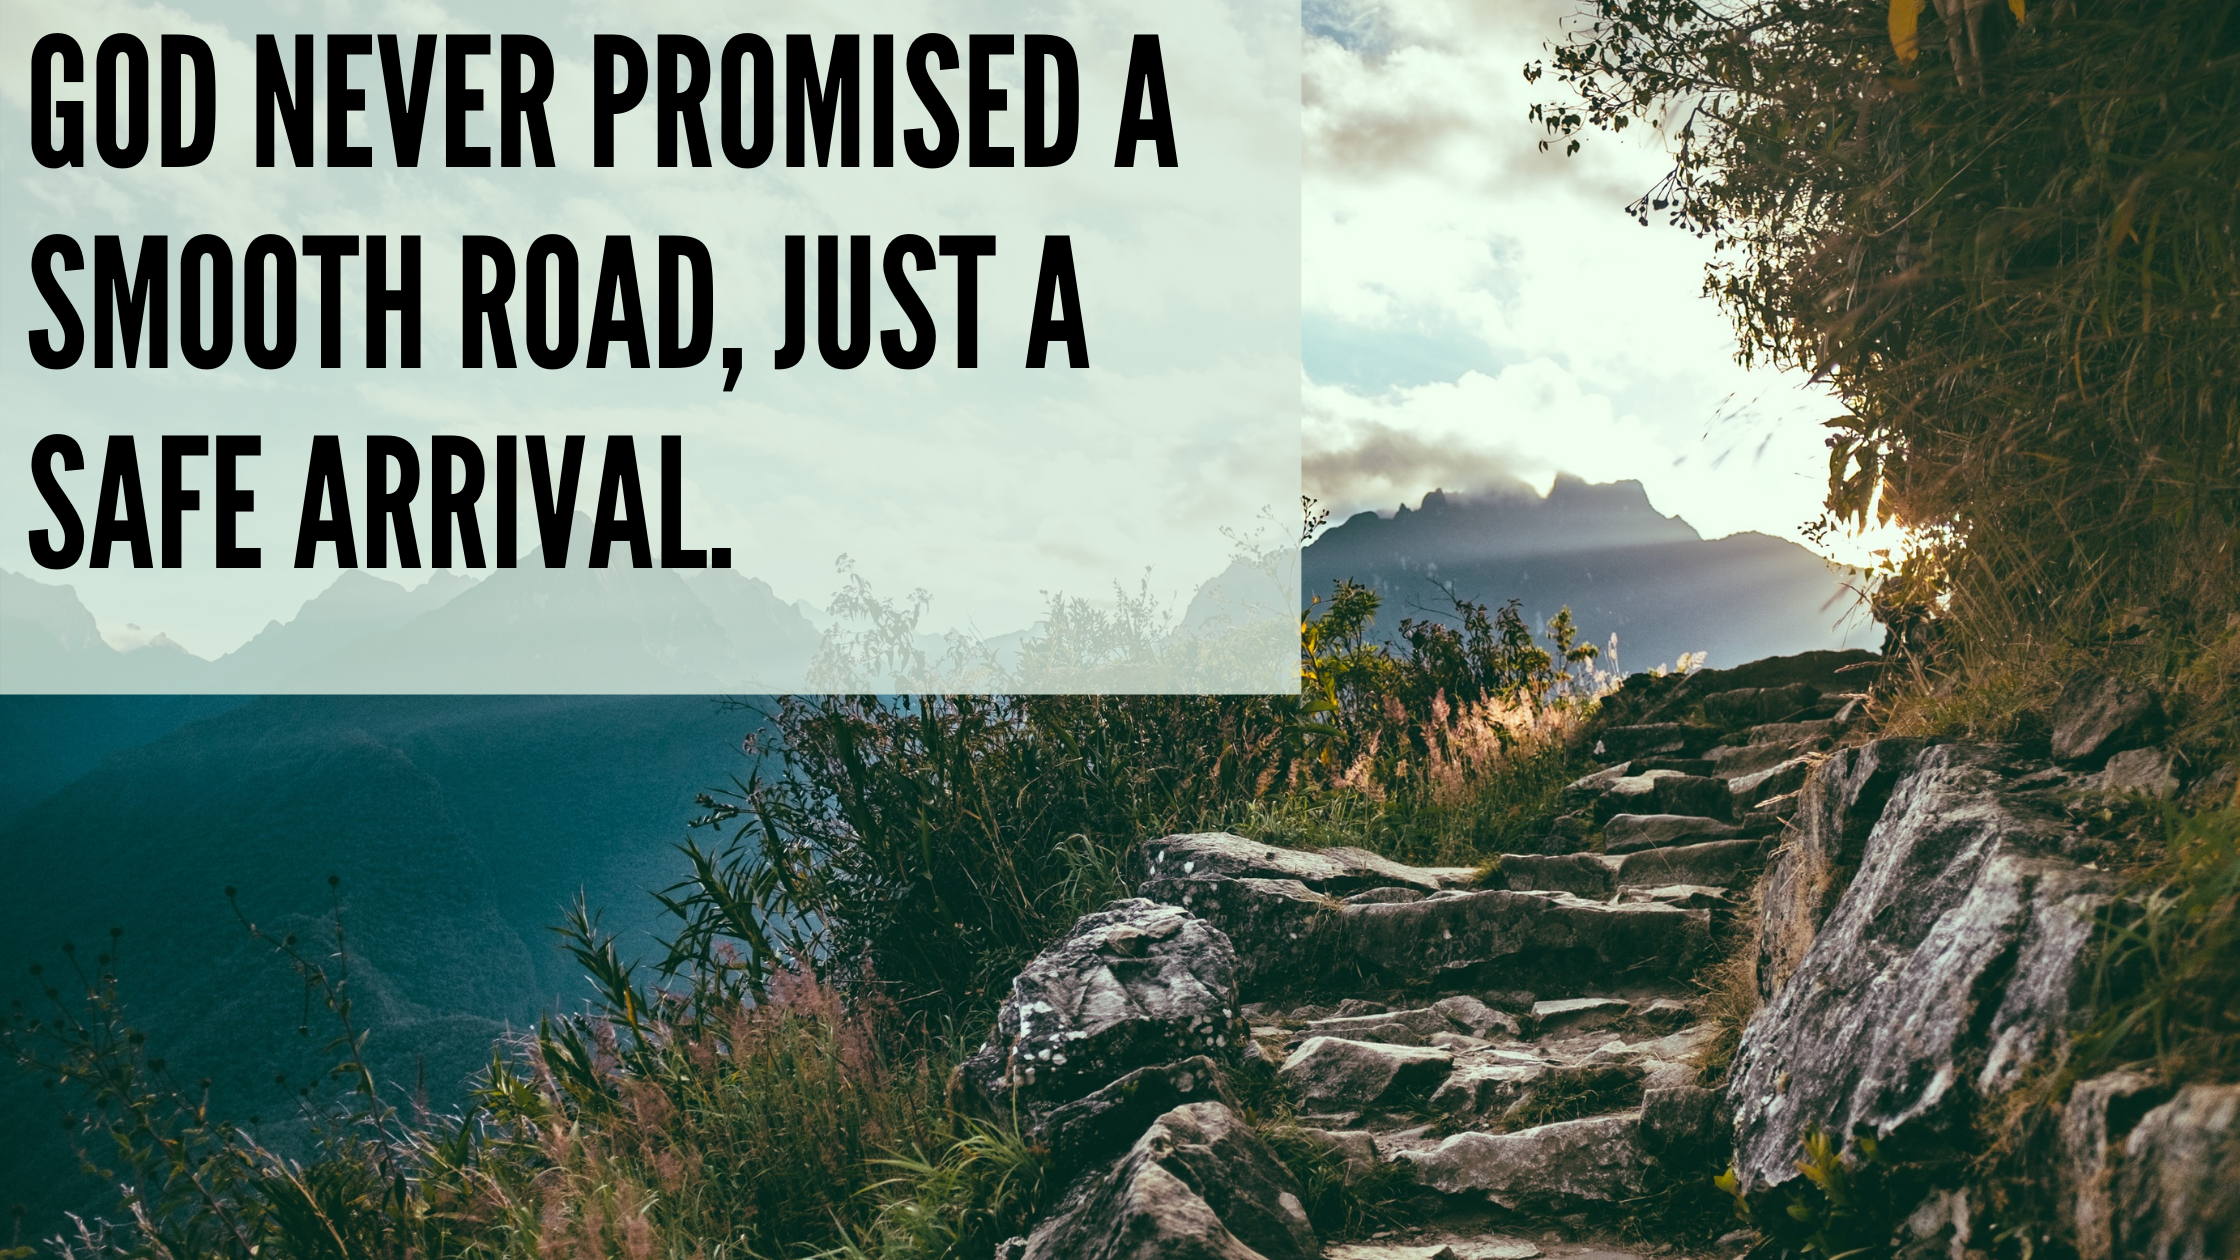 God never promised a smooth road, just a safe arrival.